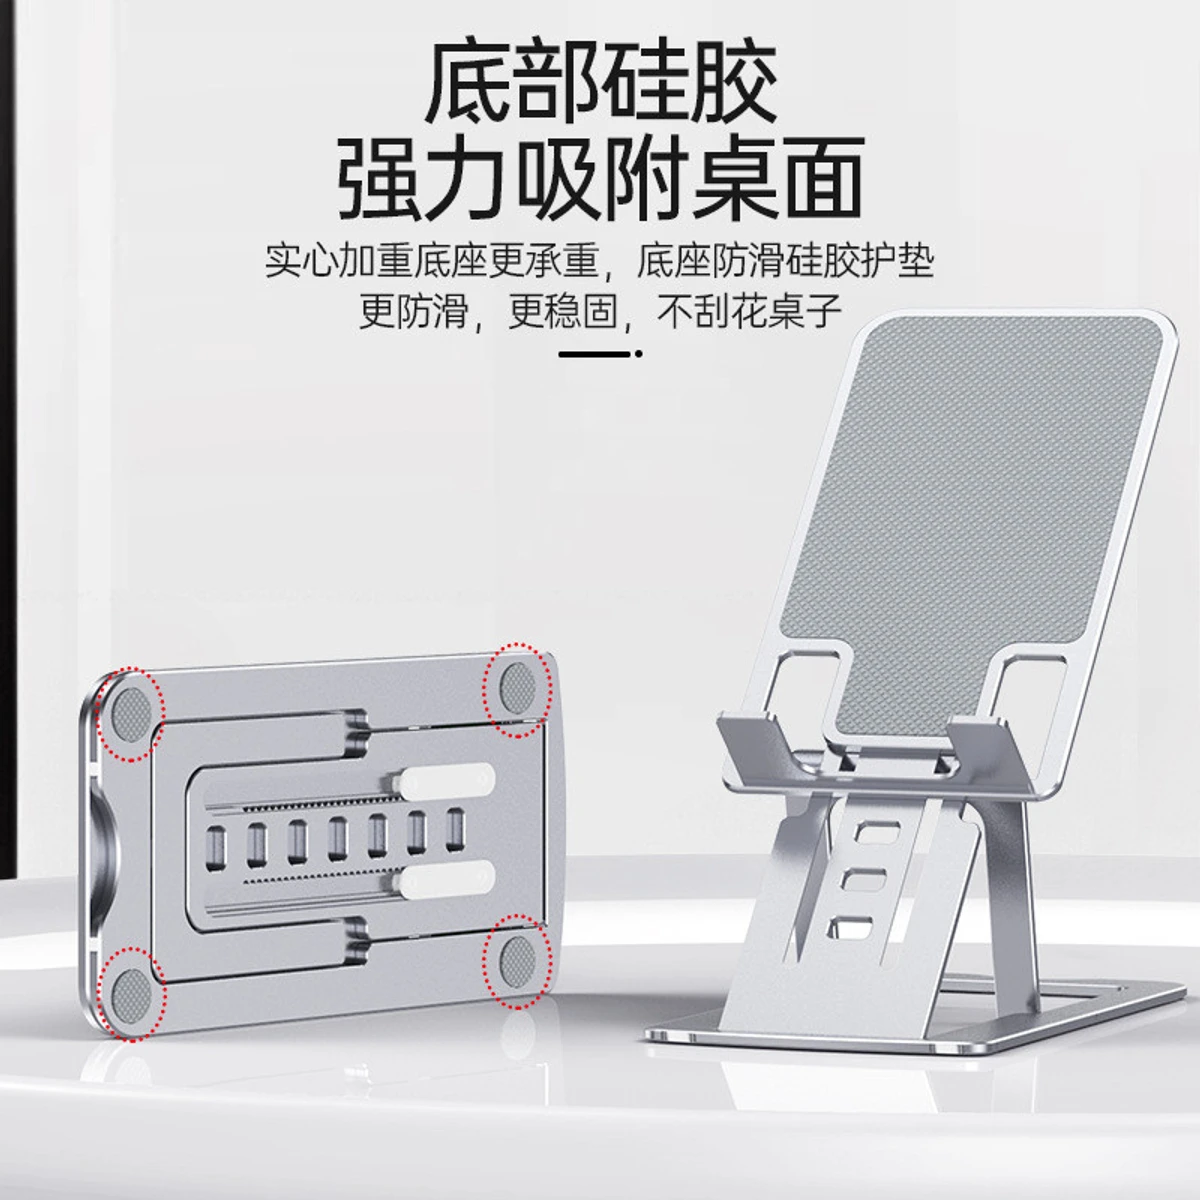 Premium Phone Holder Compact Desk Phone Stand Non Slip Support Mobile Phone Phone Holder Desk Stand